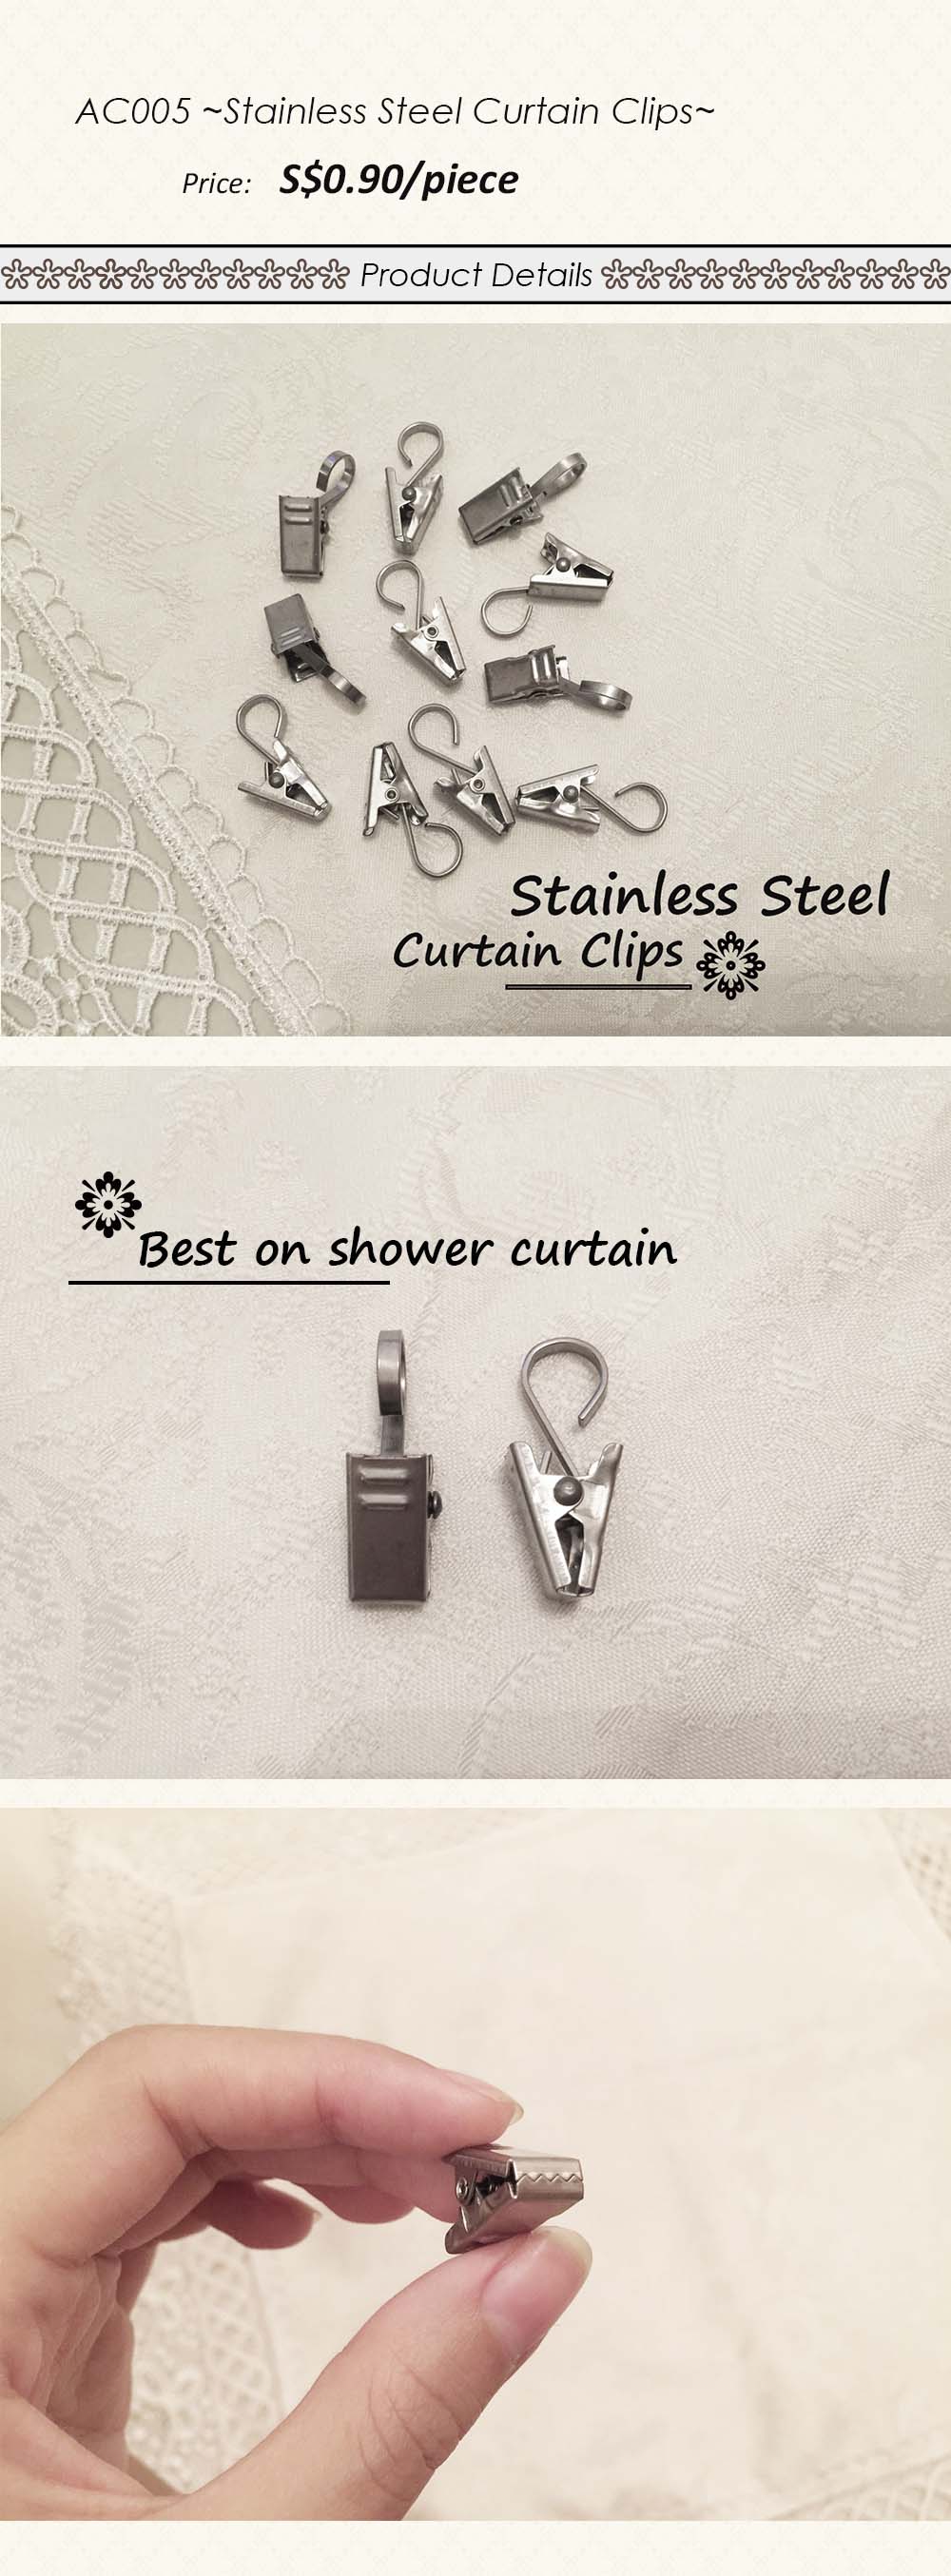 AC005 ~Stainless Steel Curtain Clips~